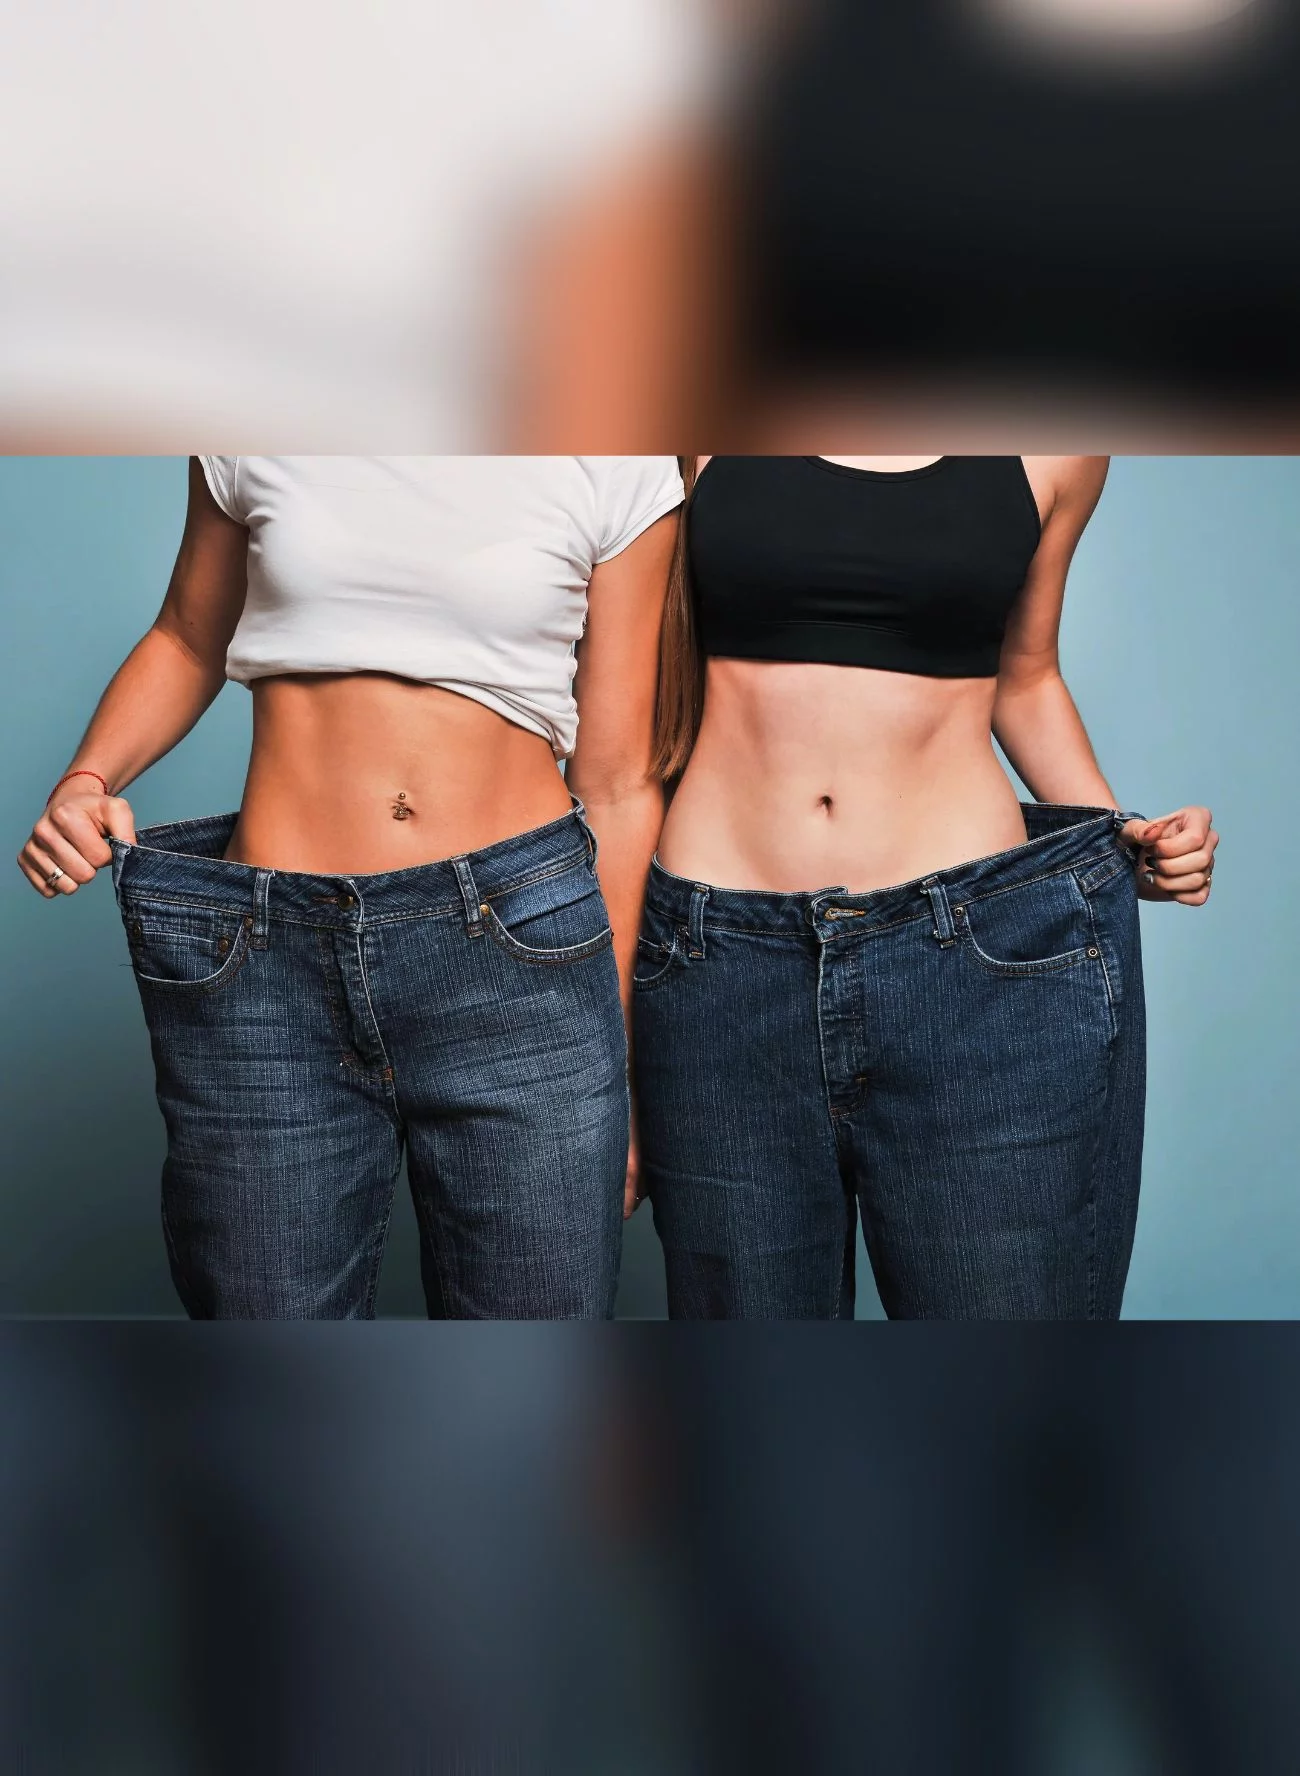 Weight Loss Injections (Semaglutide)